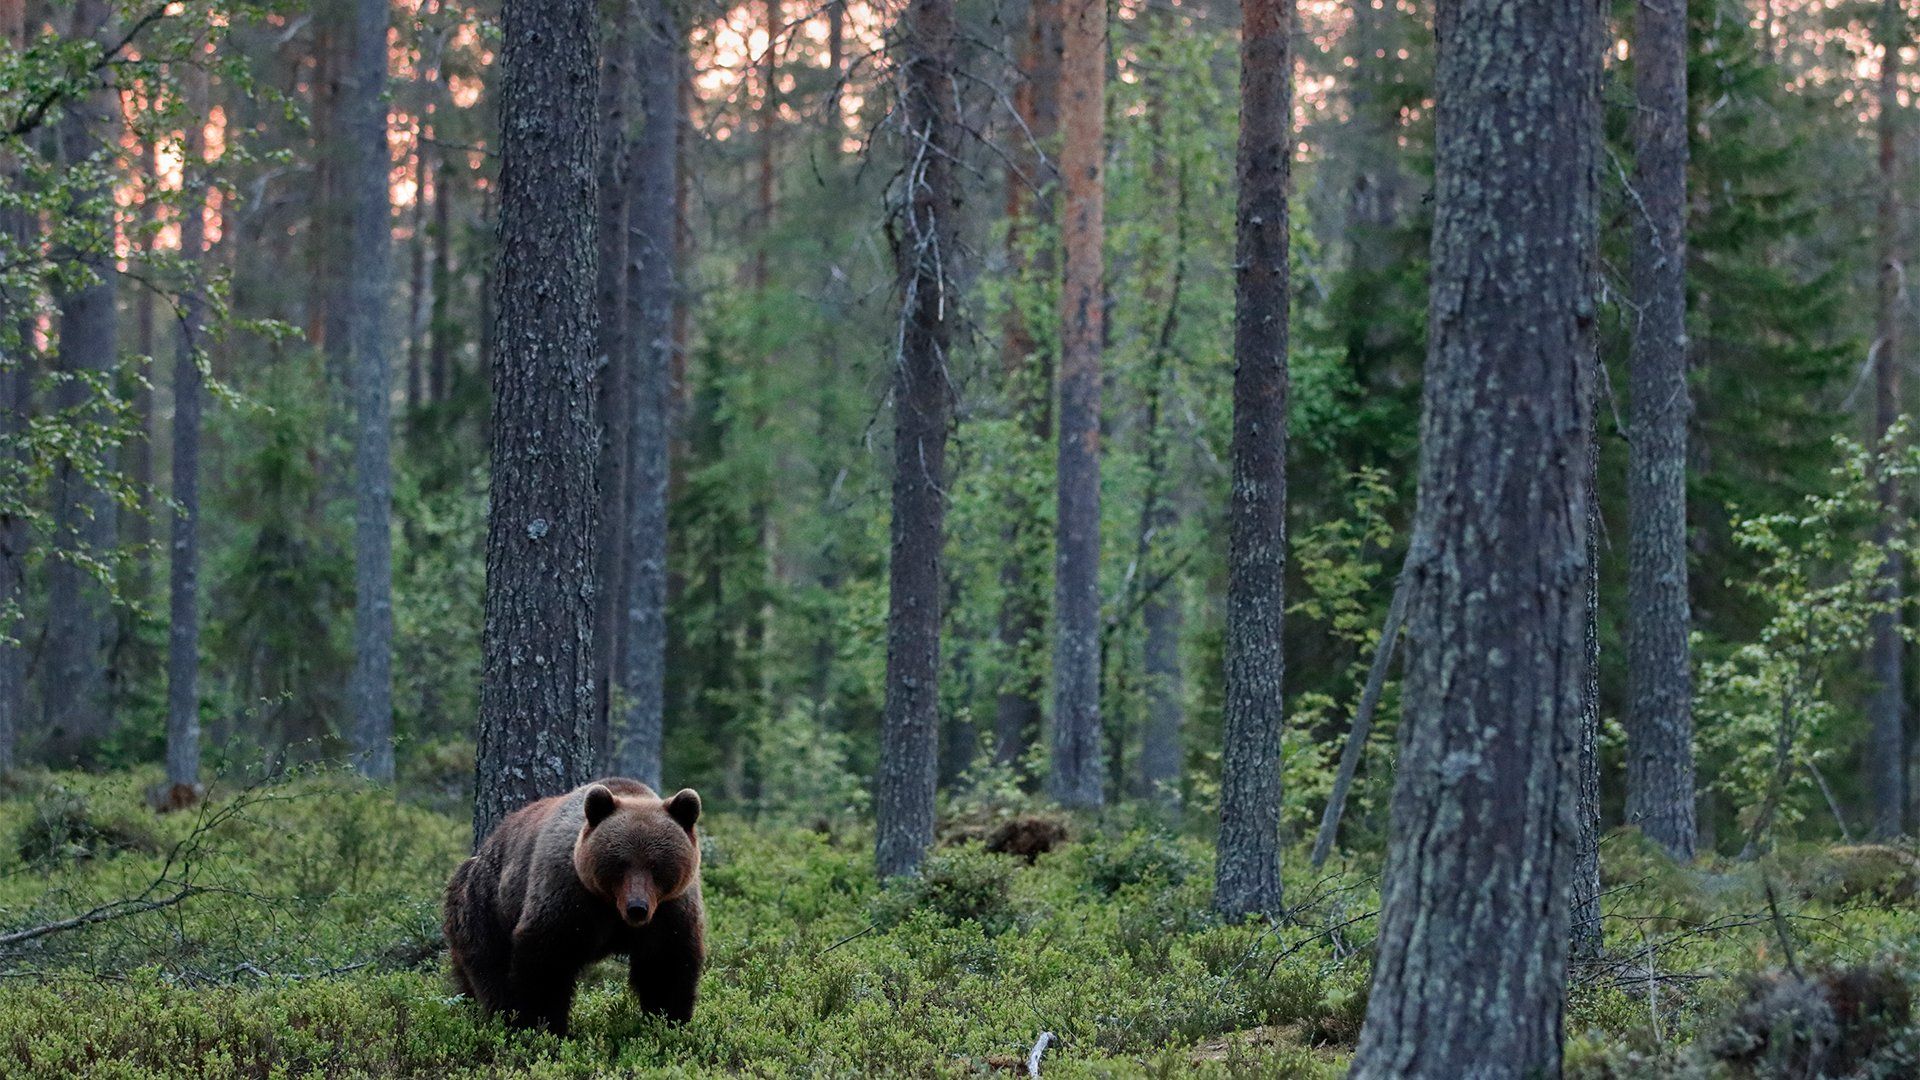 A brown bear in a wood, photographed with a Canon EOS 90D.